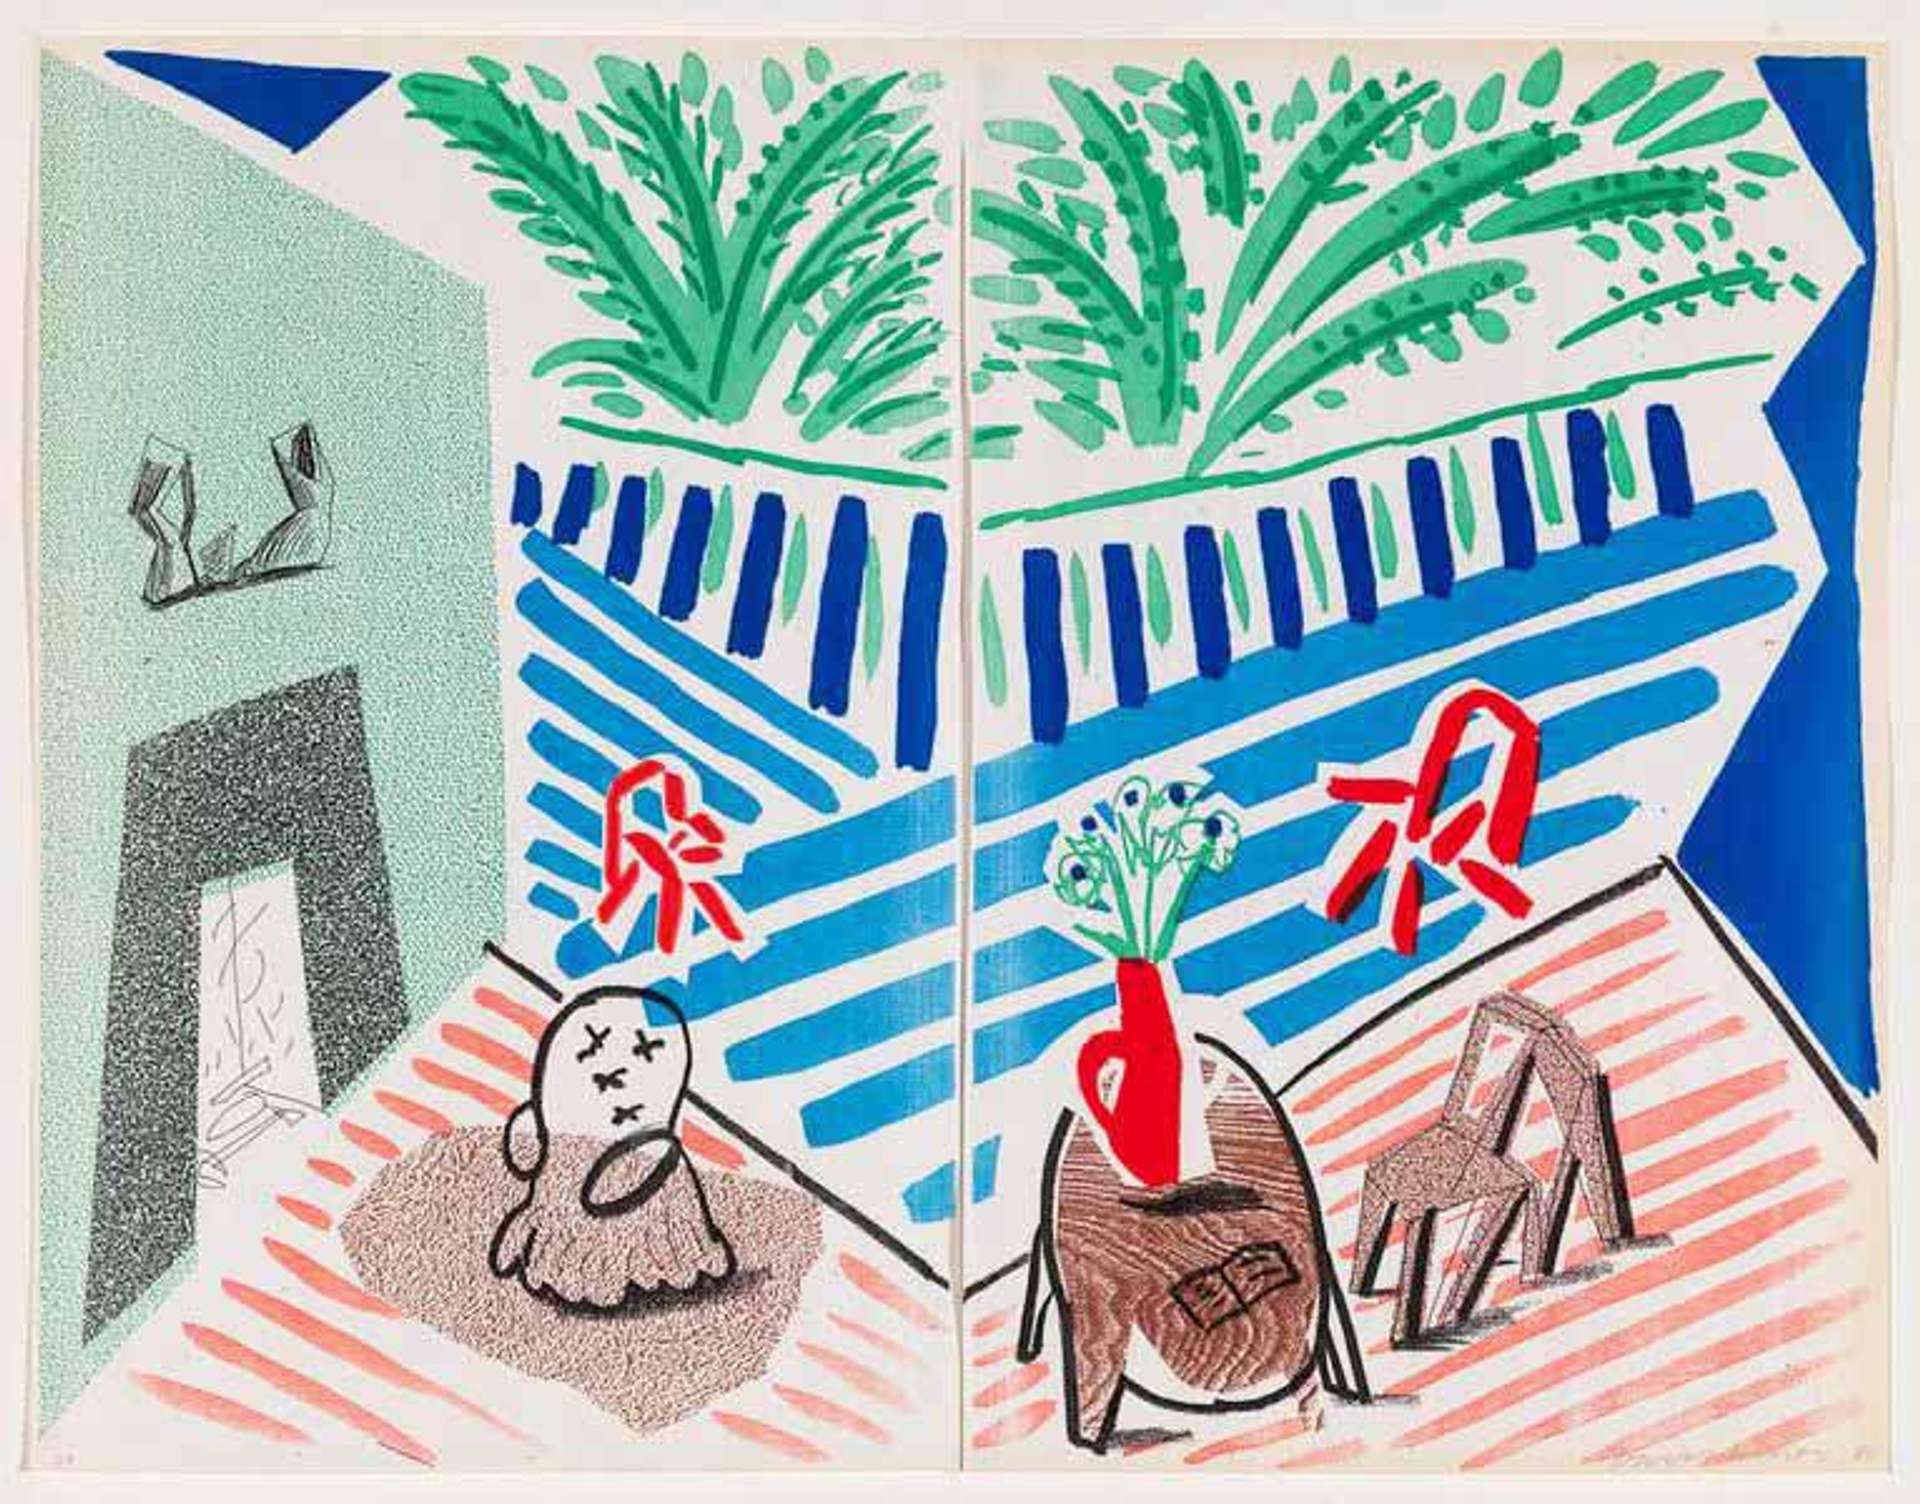 David Hockney, Technology and Perspective: Ways of Seeing in the 21st Century